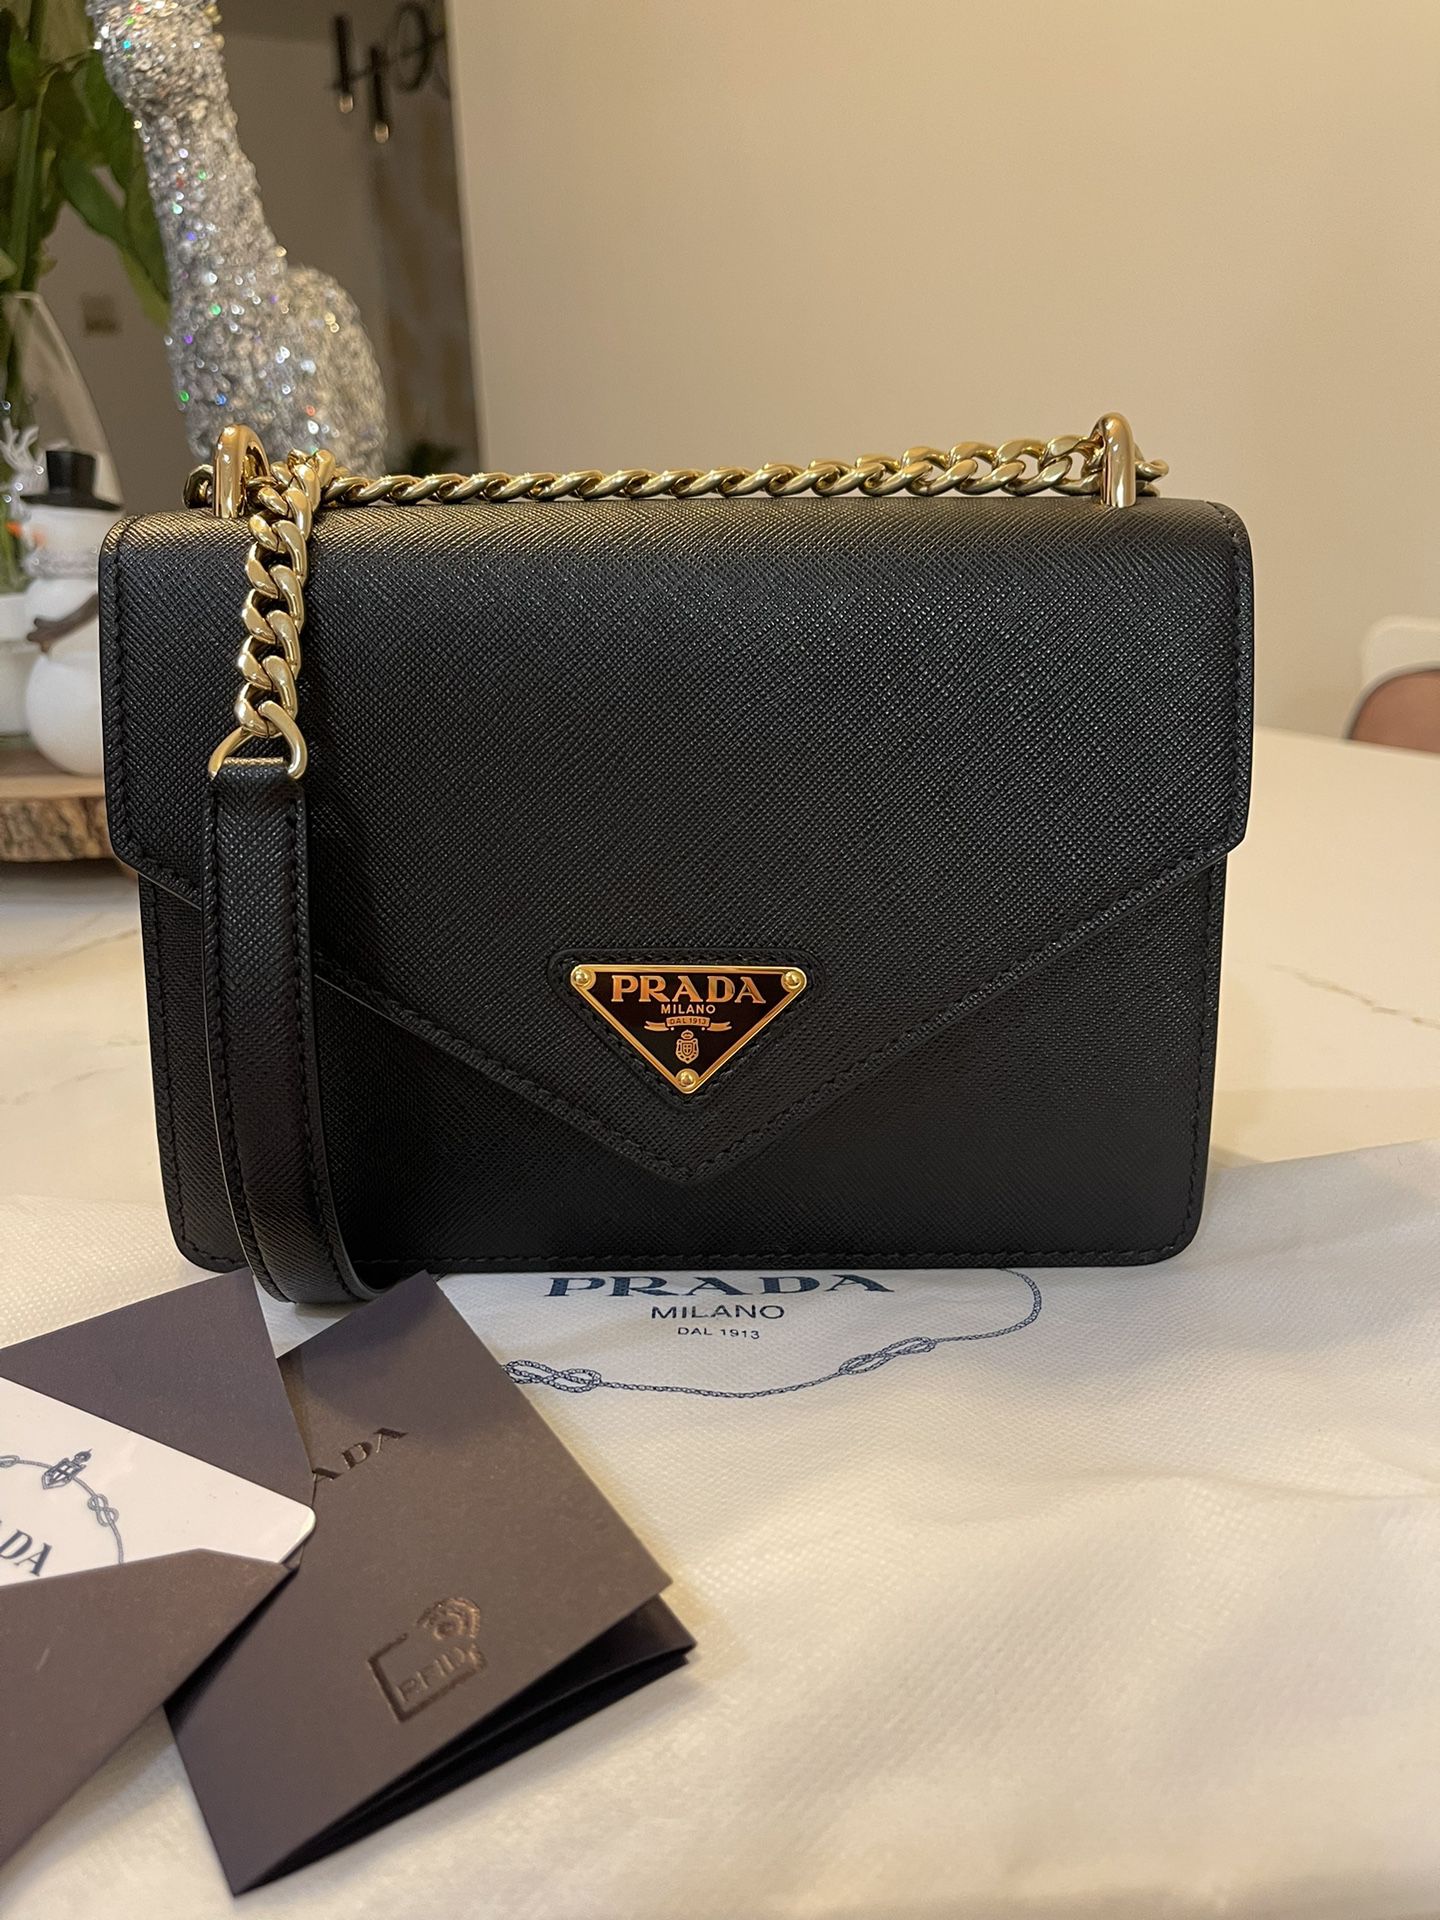 New Co llection PRADA HAND BAG, BLACK LEAT HER WITH GOLD FINISHES